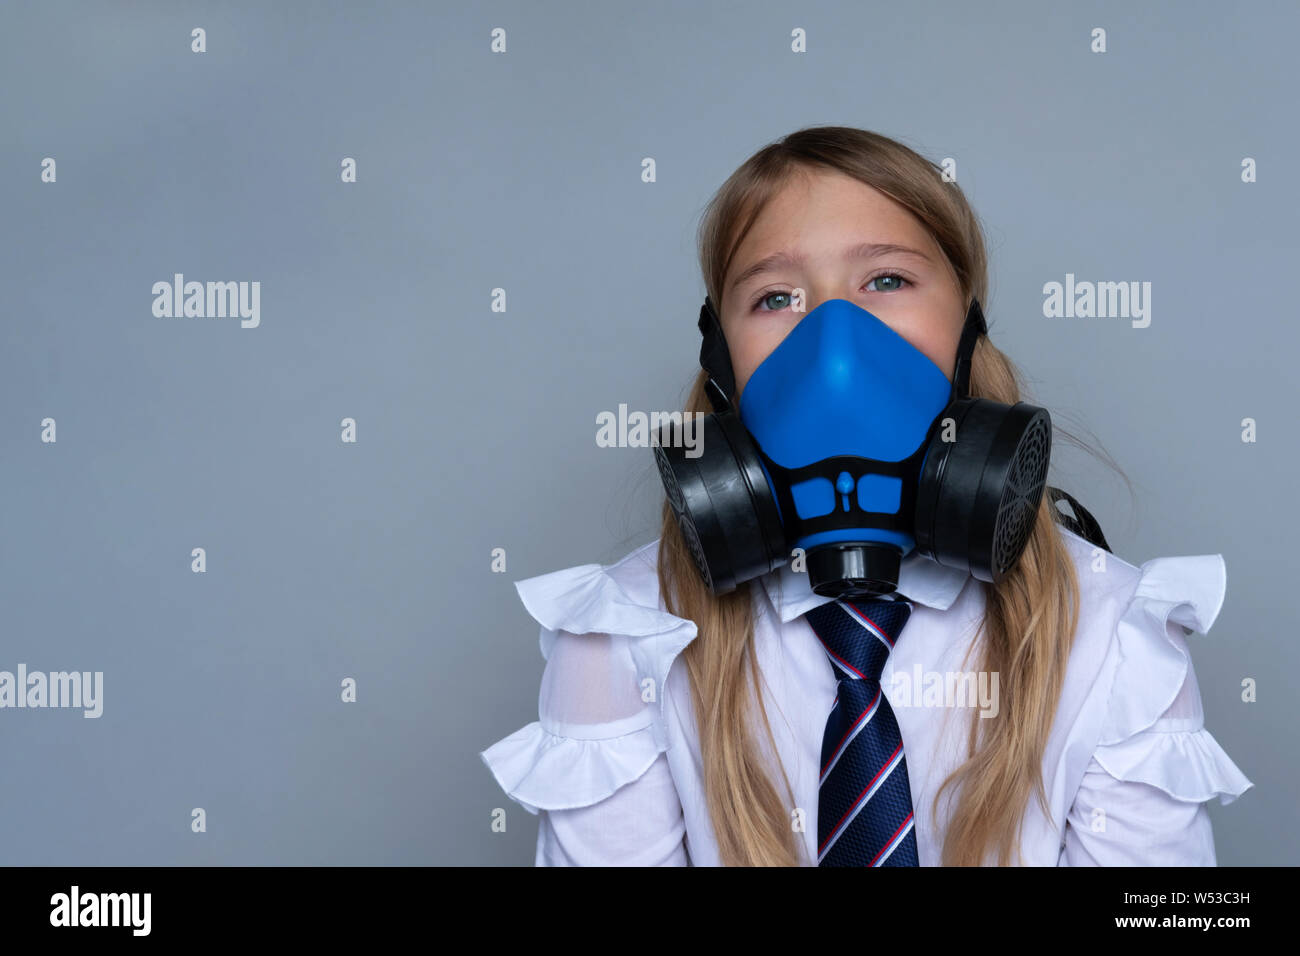 Young schoolchild in gasmask closeup portrait. Effect of pollution on small children, preteens. Dangerous environmental changes affecting younger gene Stock Photo